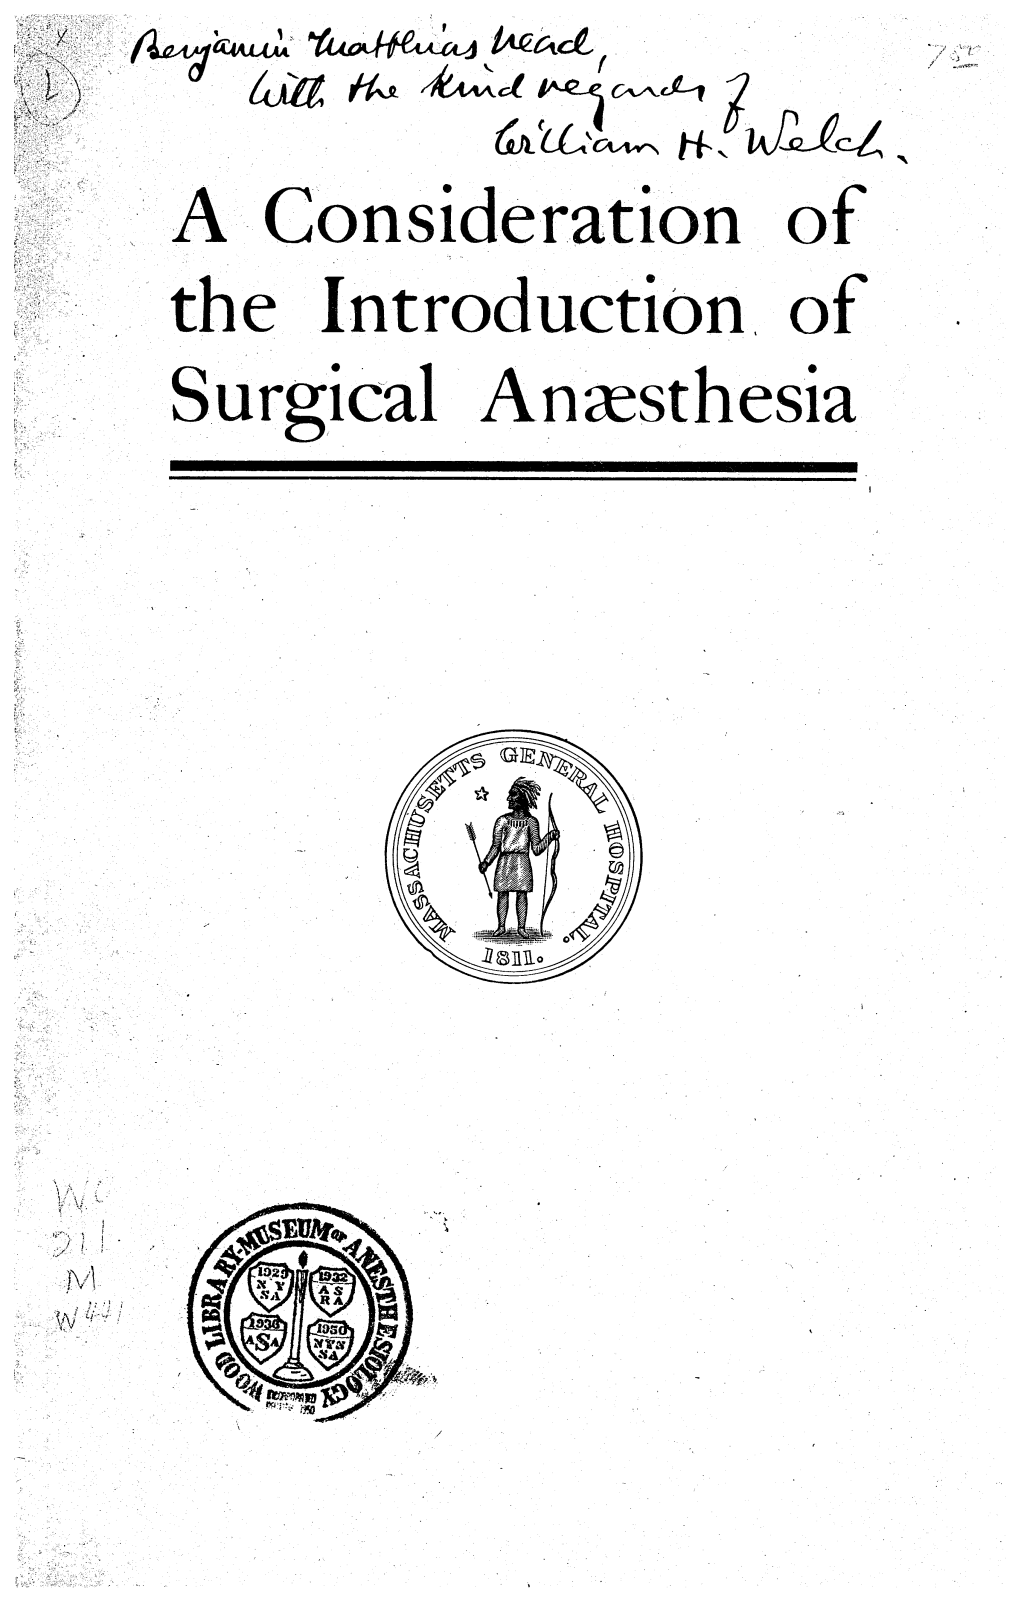 A Consideration of the Introduction. of Surgical Anaiesthesia This Accession Is Part of the RARE BOOK COLLECTION' of the WOOD LIBRARY-MUSEUM of ANESTHESIOLOGY, Inc